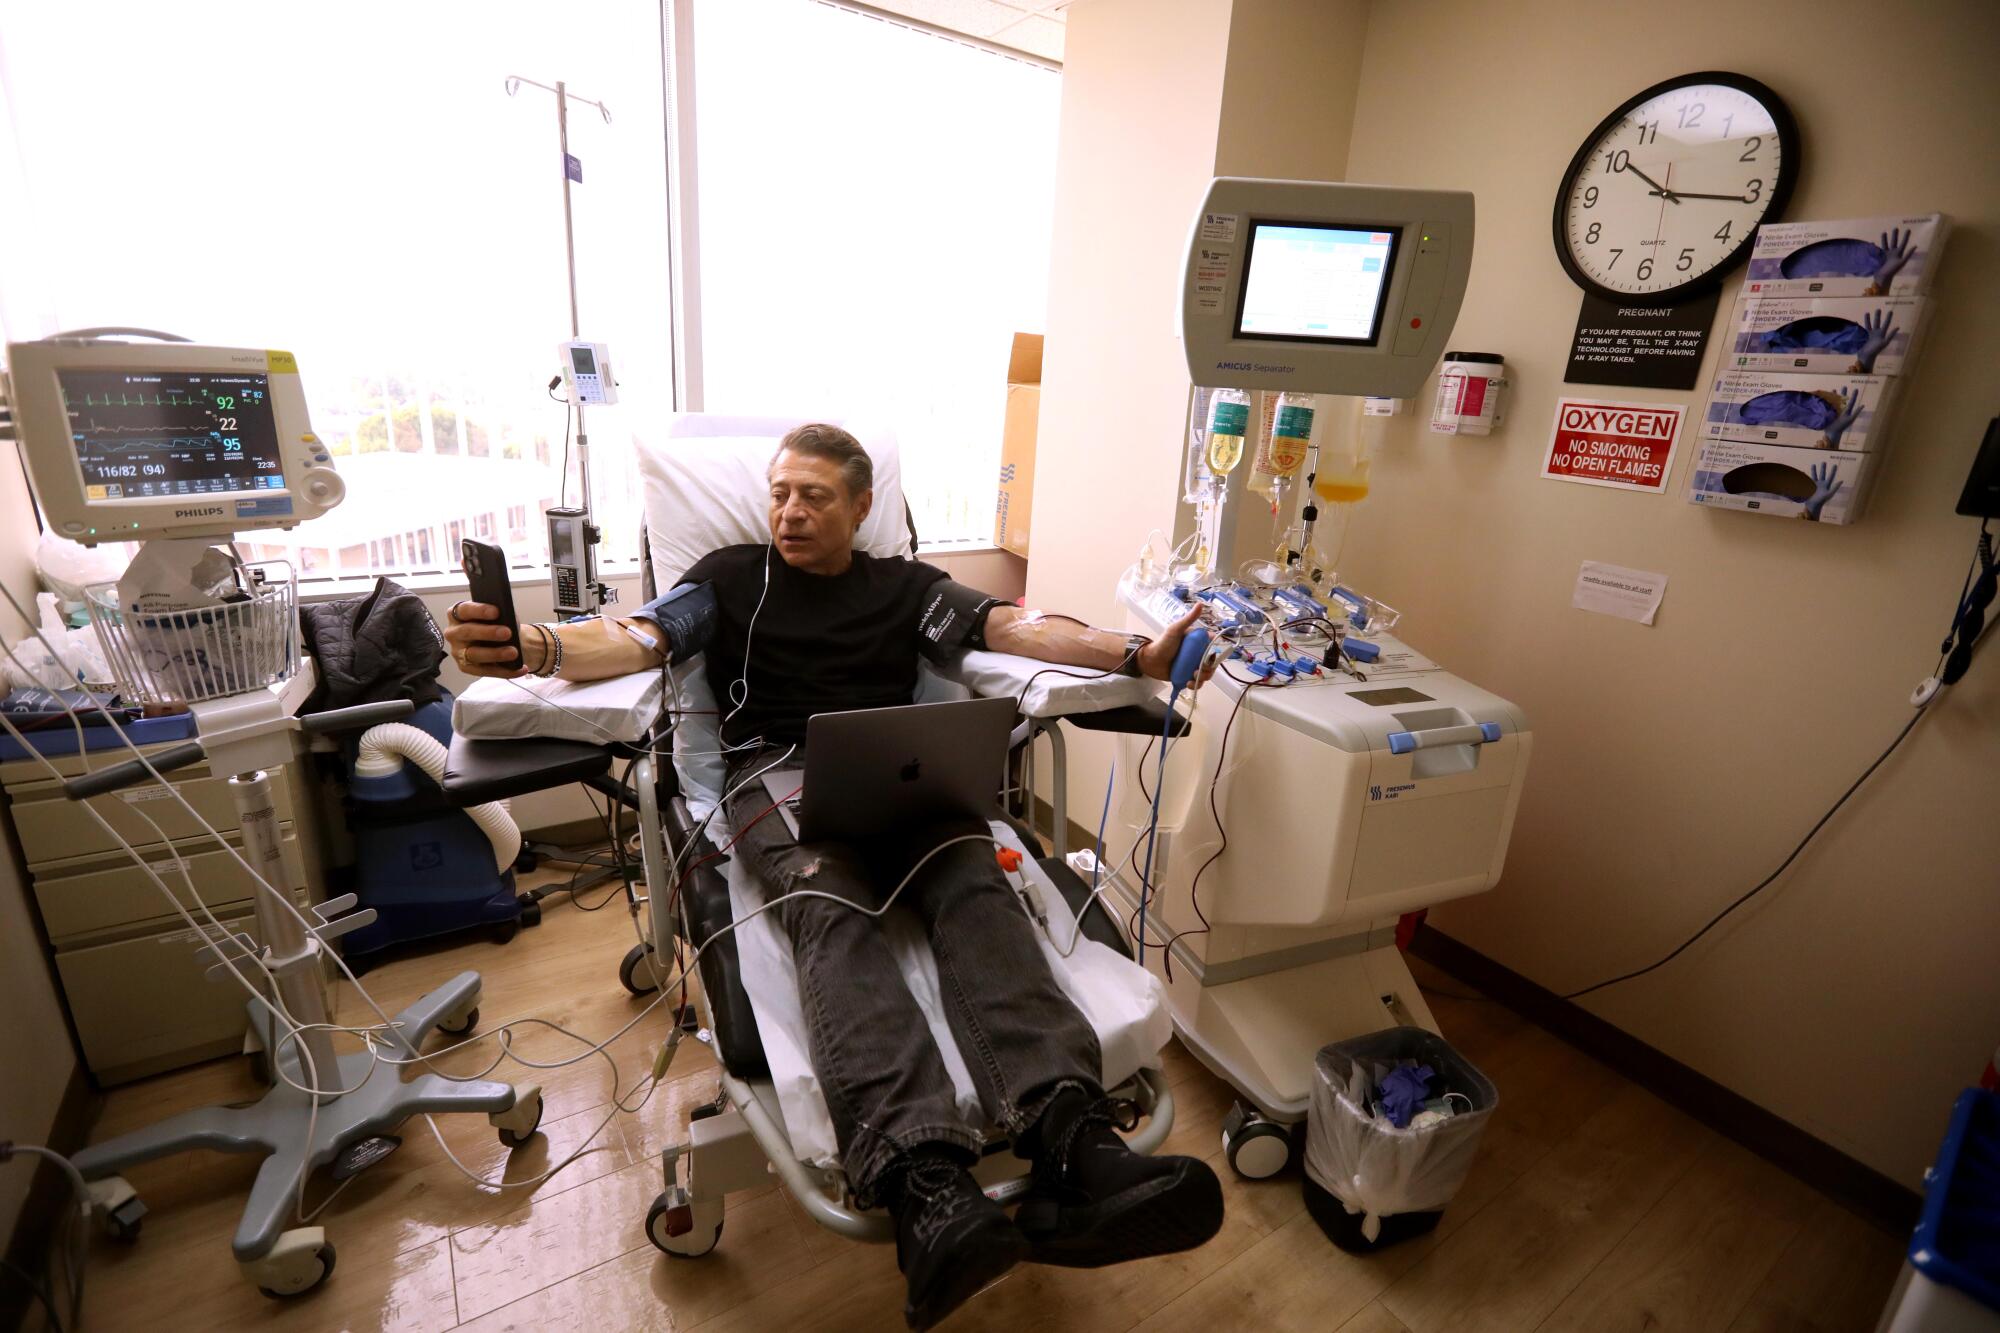 A man sits with medical machines and tubing at his sides.  